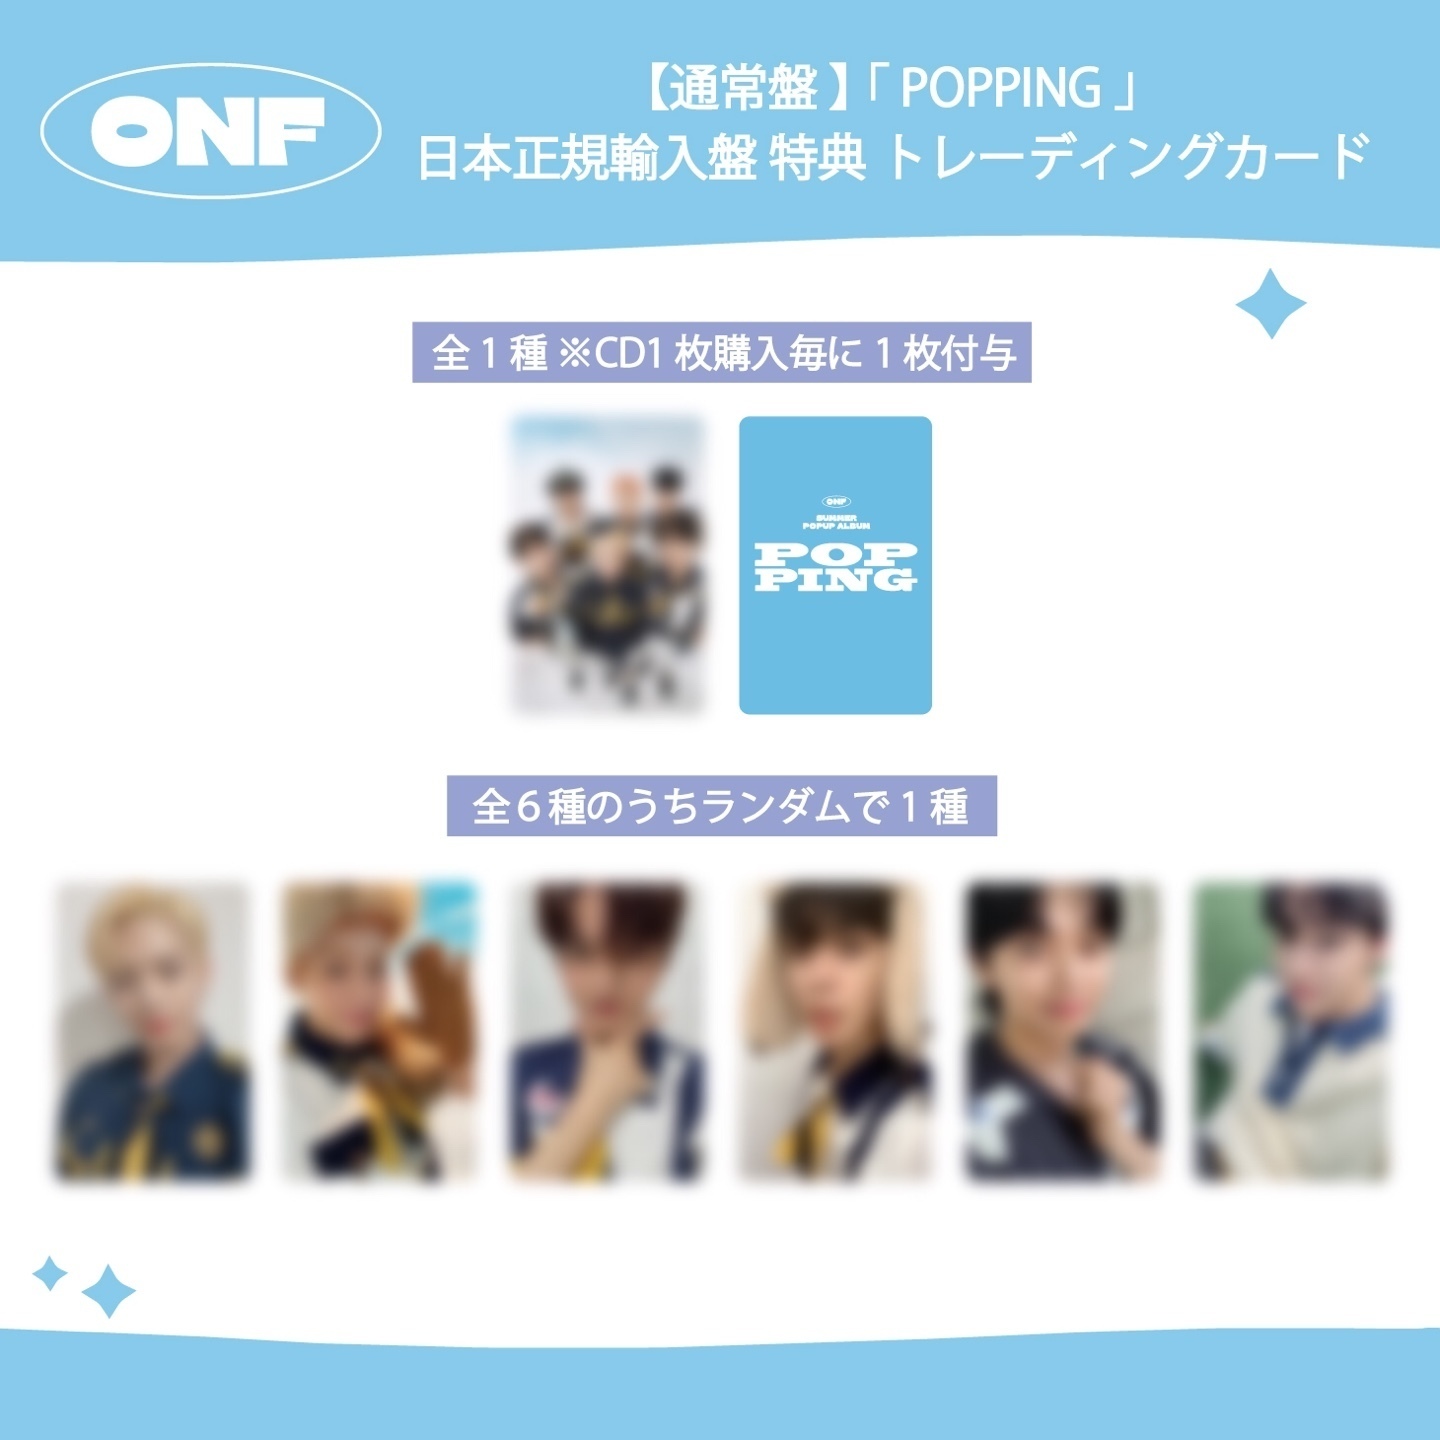 ONF SUMMER POPUP ALBUM「POPPING」正規日本輸入盤 特典イメージ解禁 ...